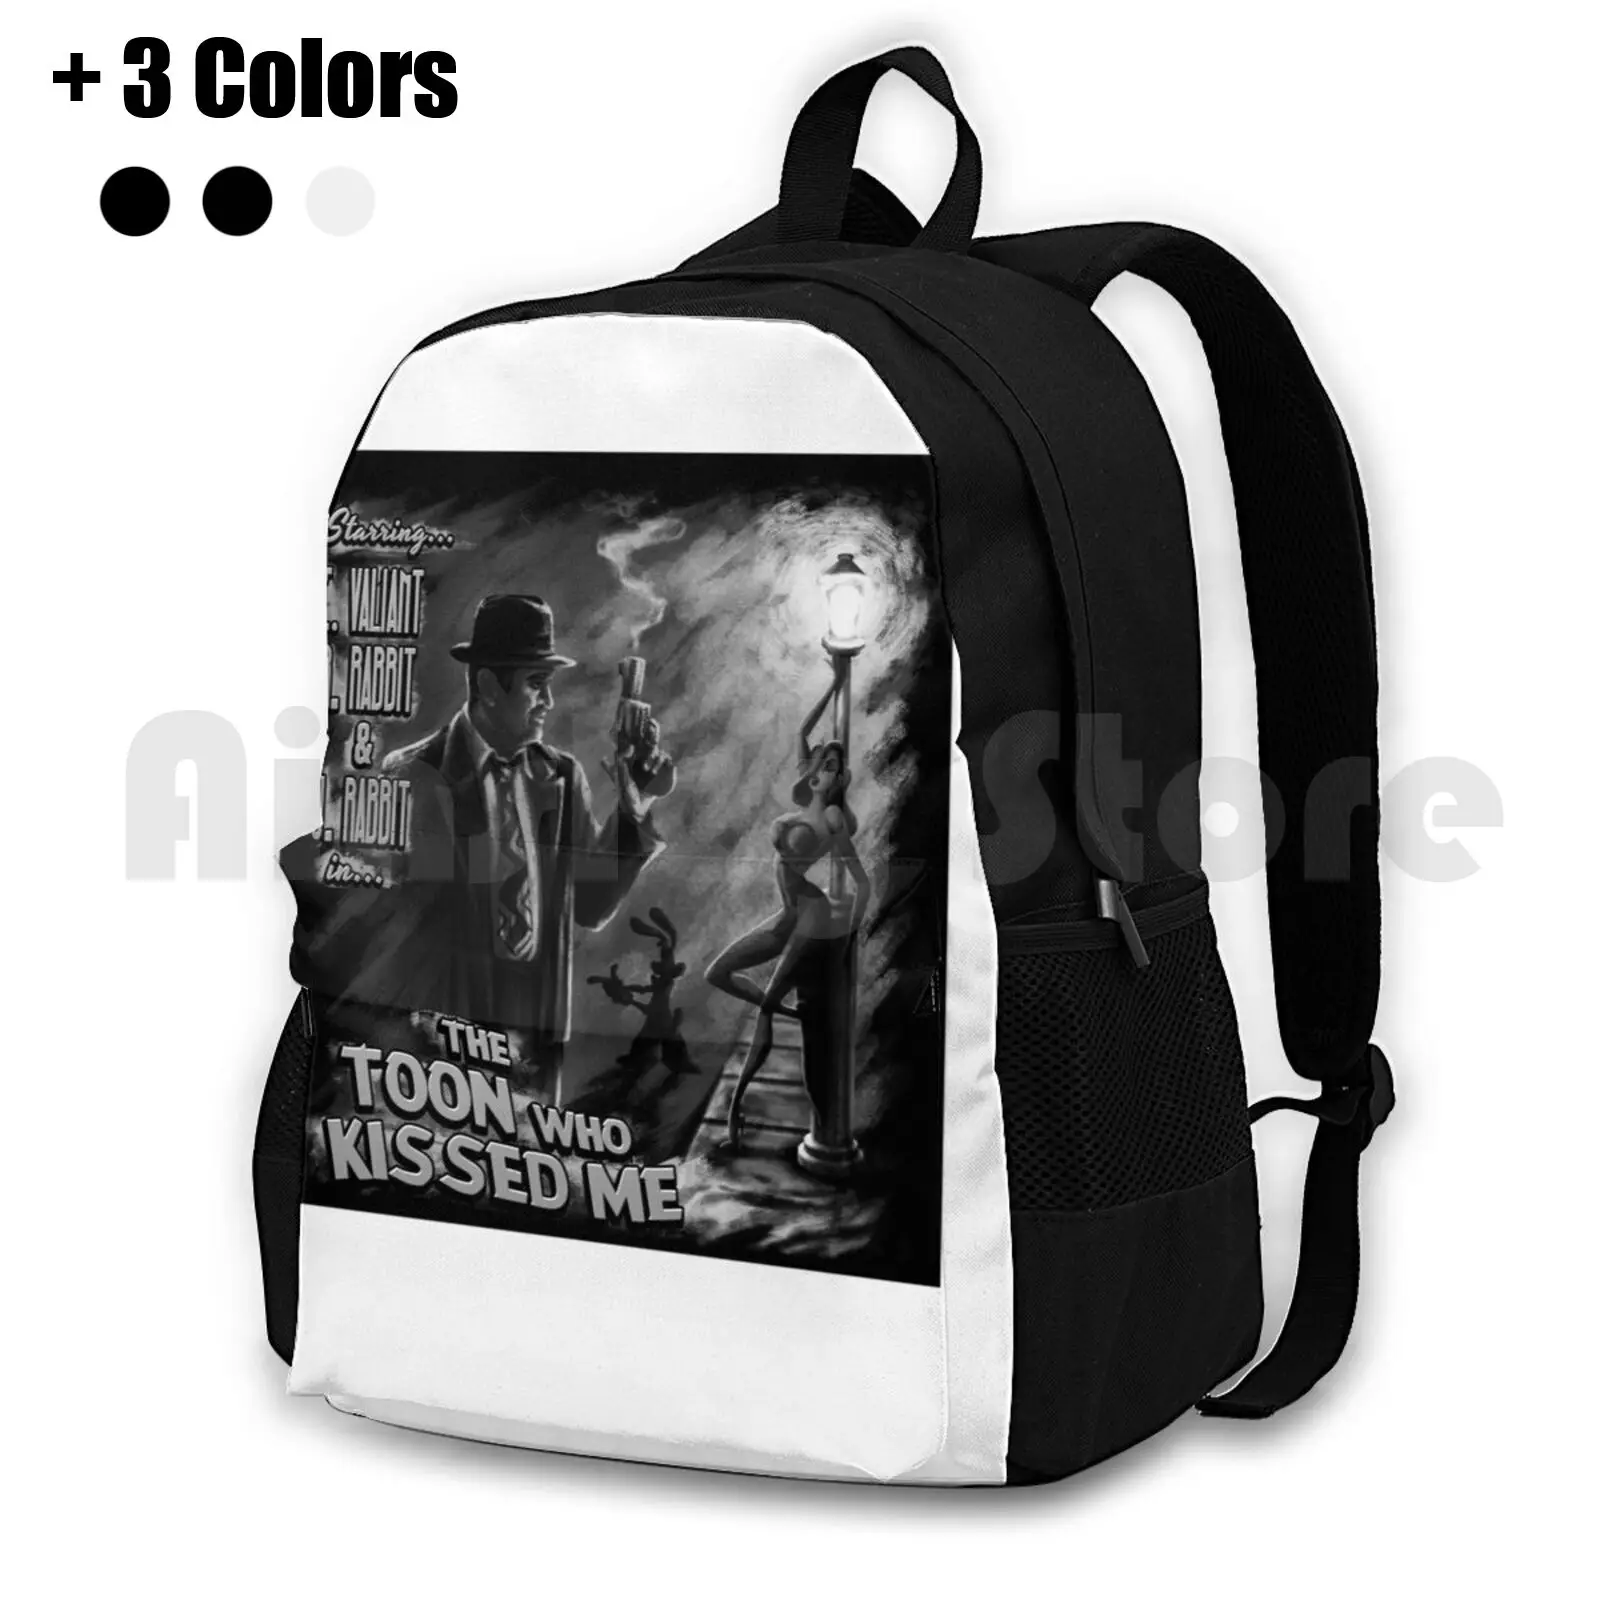 

The Toon Who Kissed Me ( B&W ) Outdoor Hiking Backpack Riding Climbing Sports Bag Rabbit Eddie 80S Movies Toons Cartoon